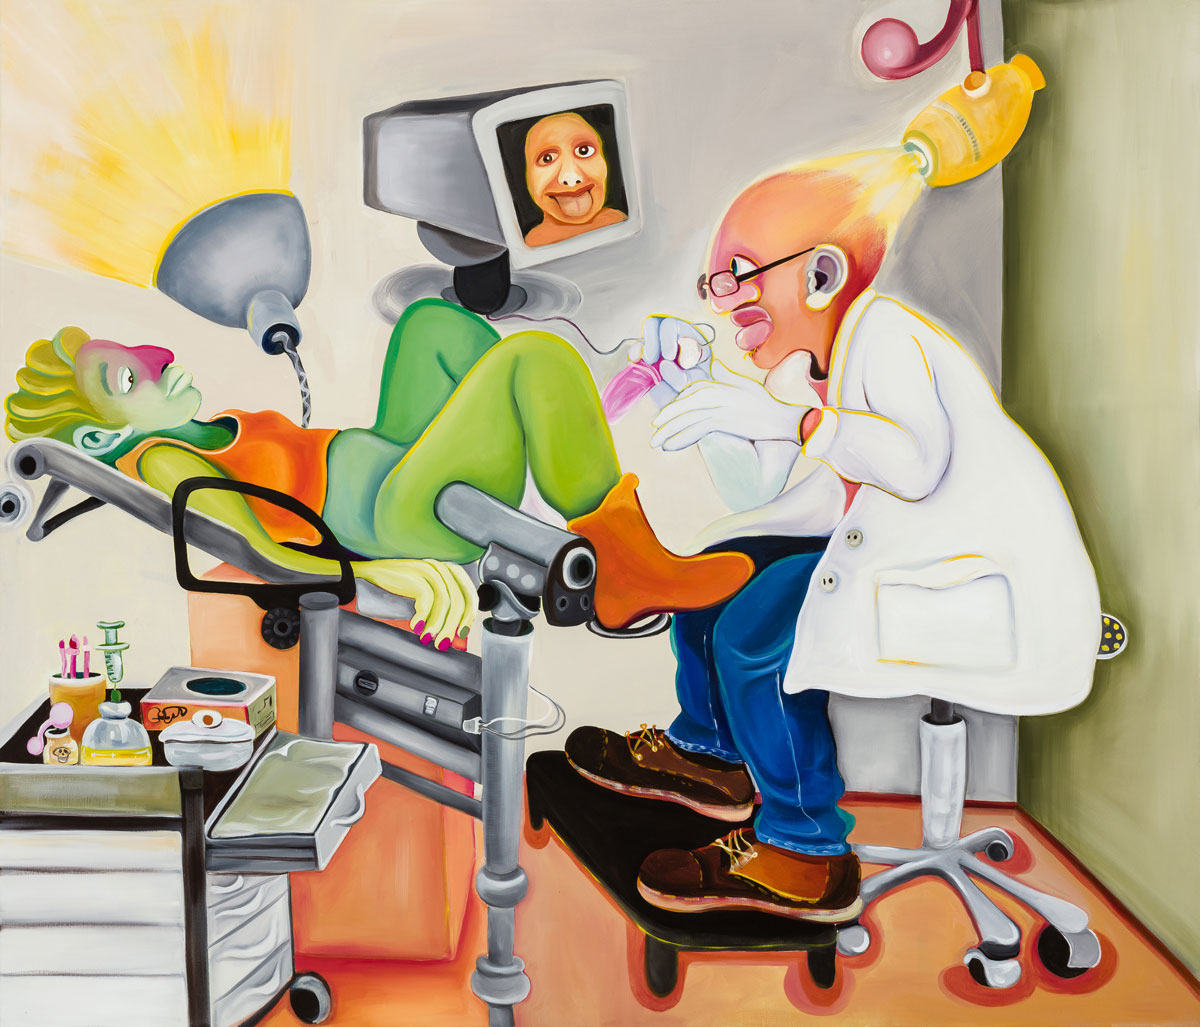 Woman reclining in stirrups with elderly male gynecologist examining her